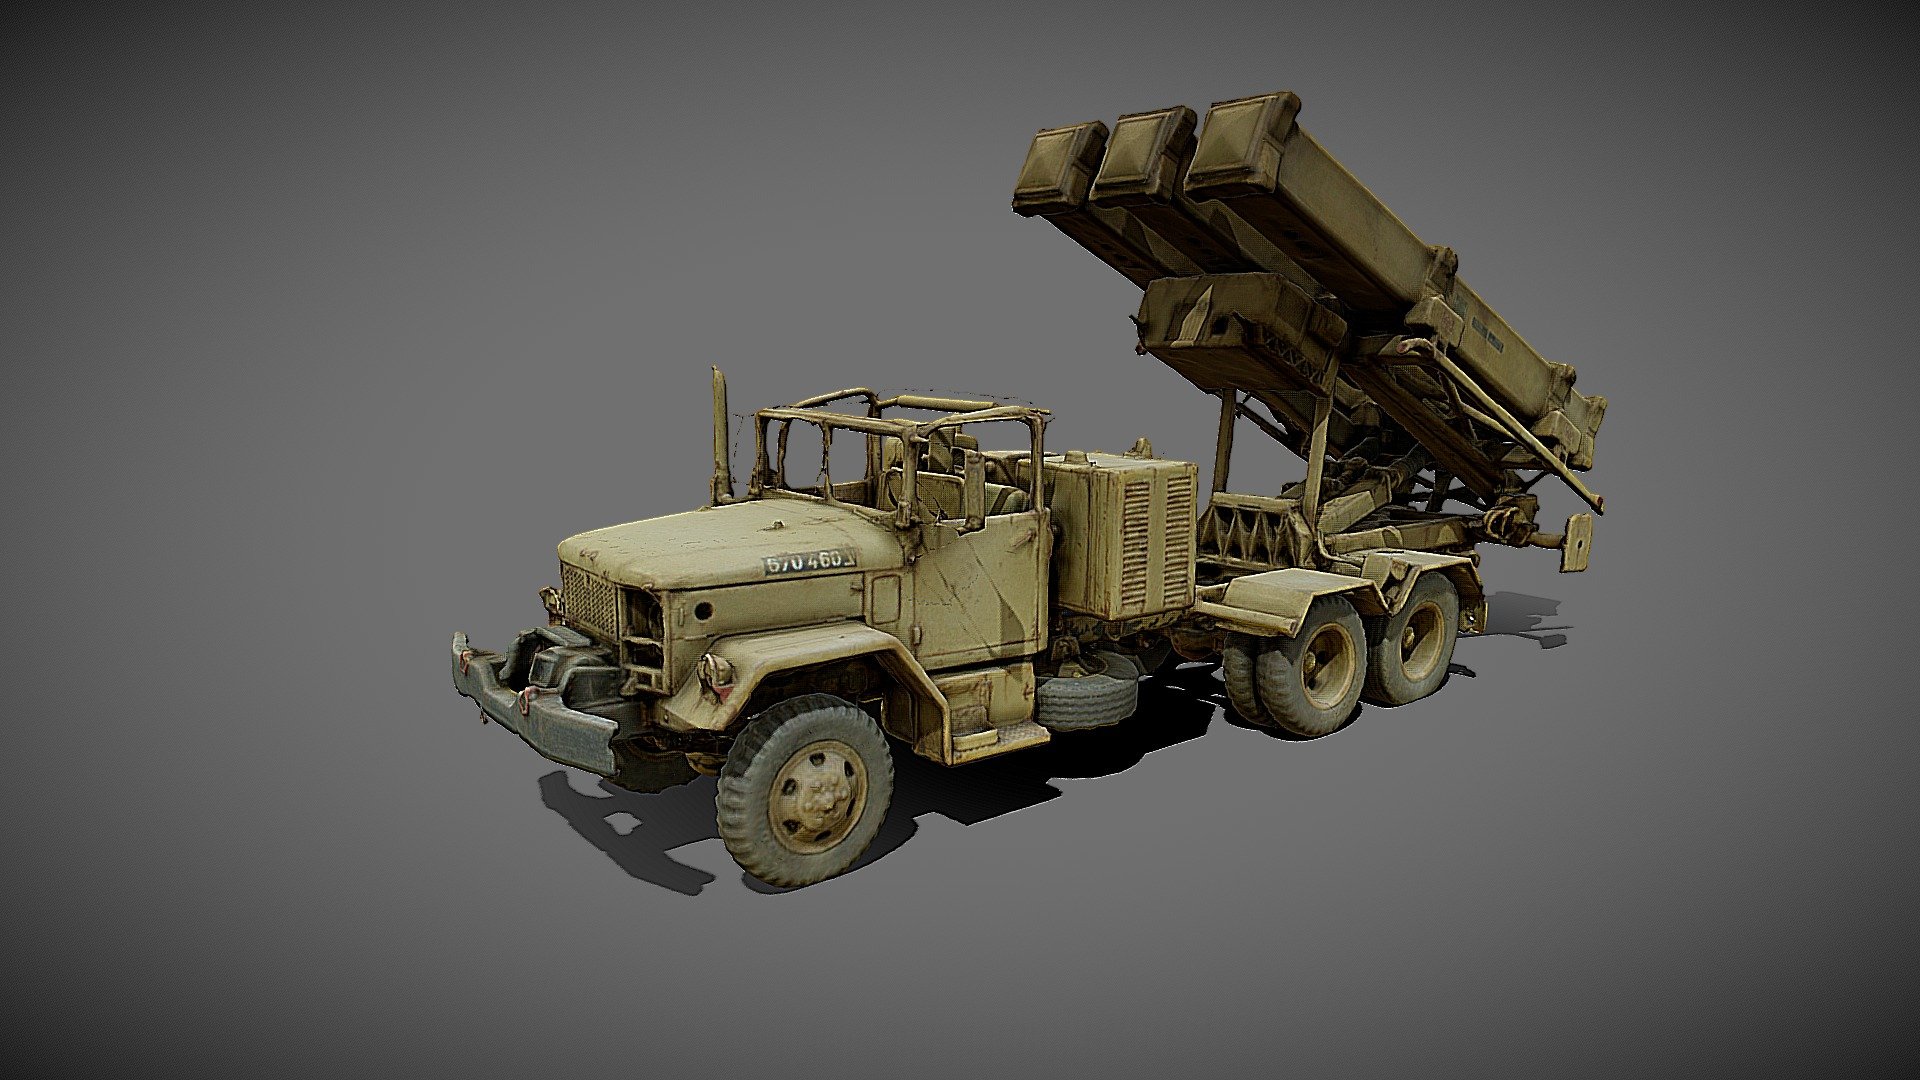 Autoretop 3D scan model of AMAC35. Thanks for him. Original model https://skfb.ly/ouX8A - Military truck - Download Free 3D model by Ashkelon 3d model